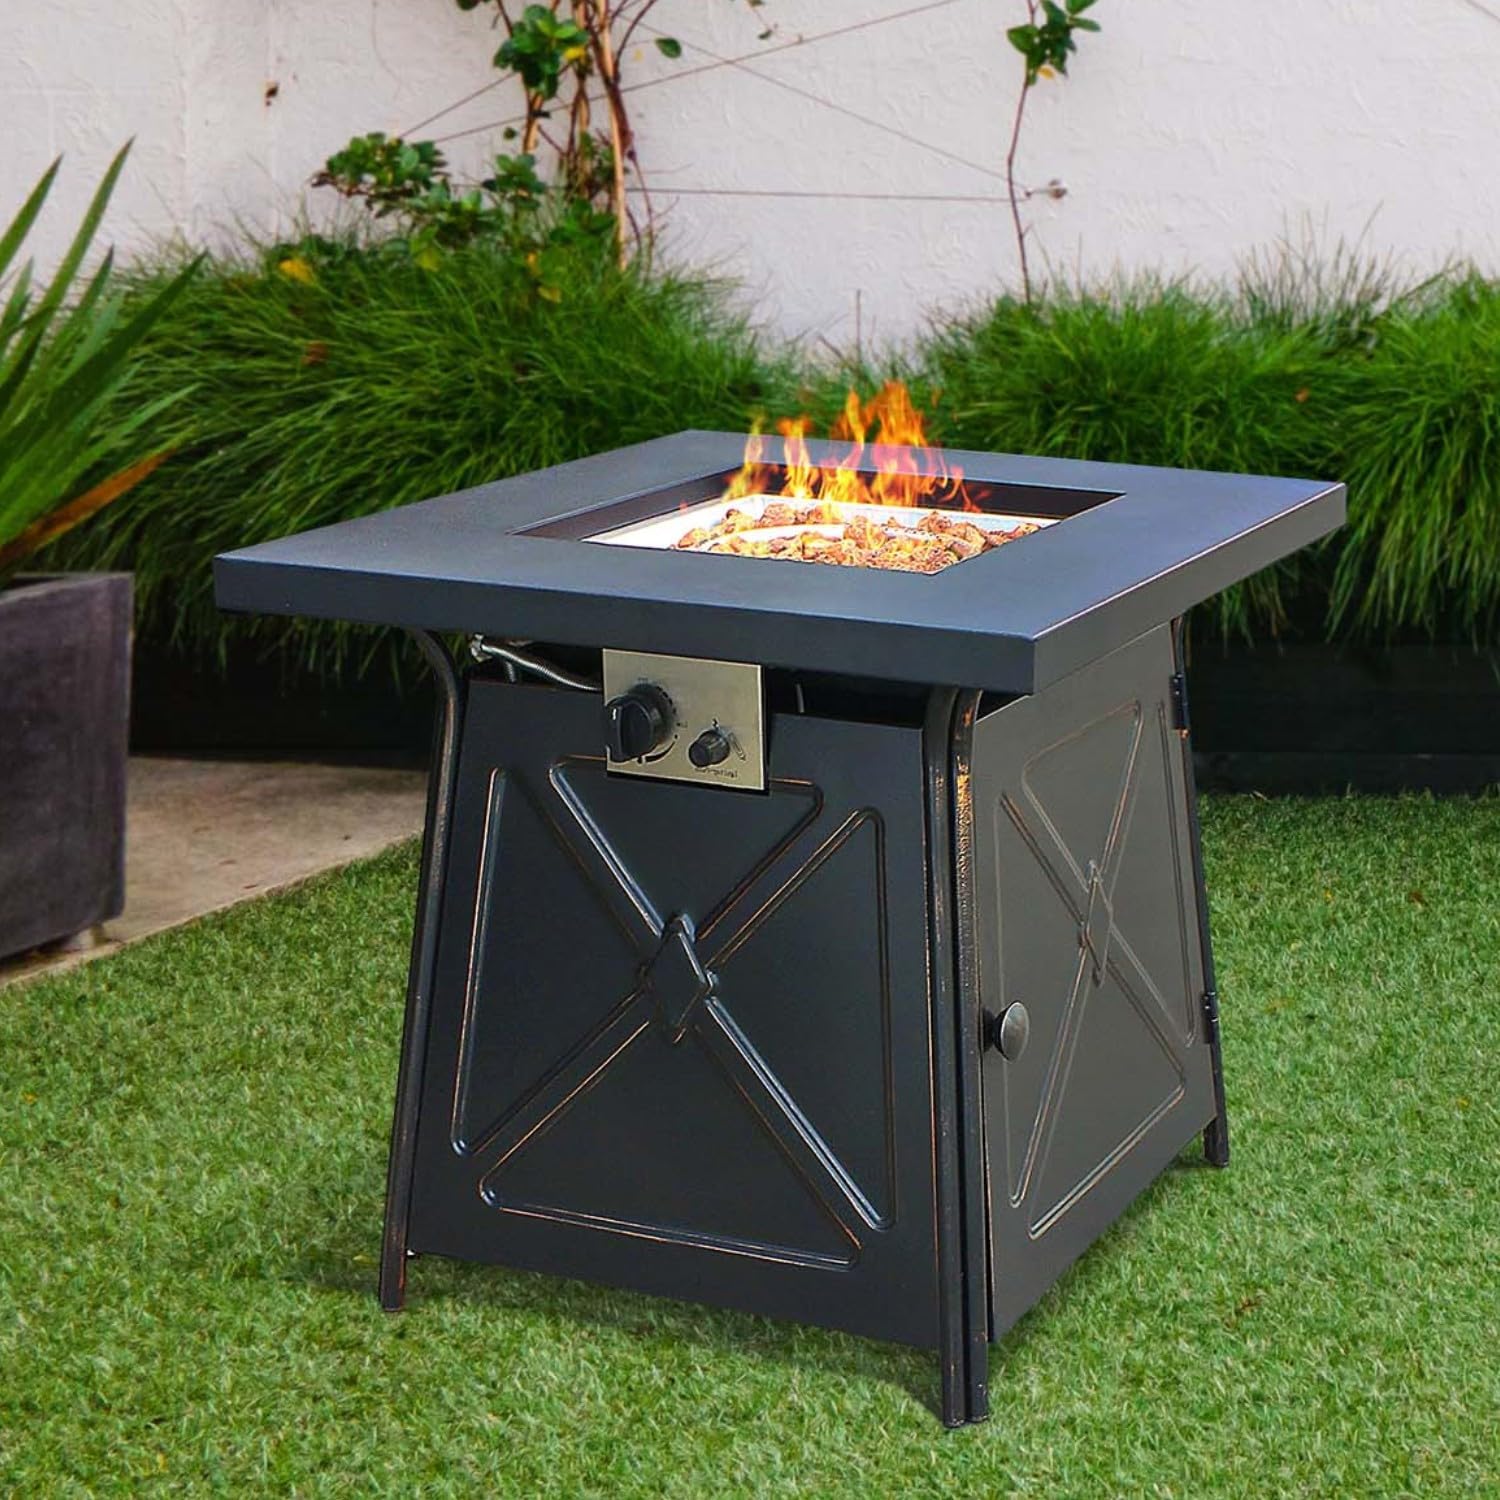 OutVue 28″ Fire Pit Table Review